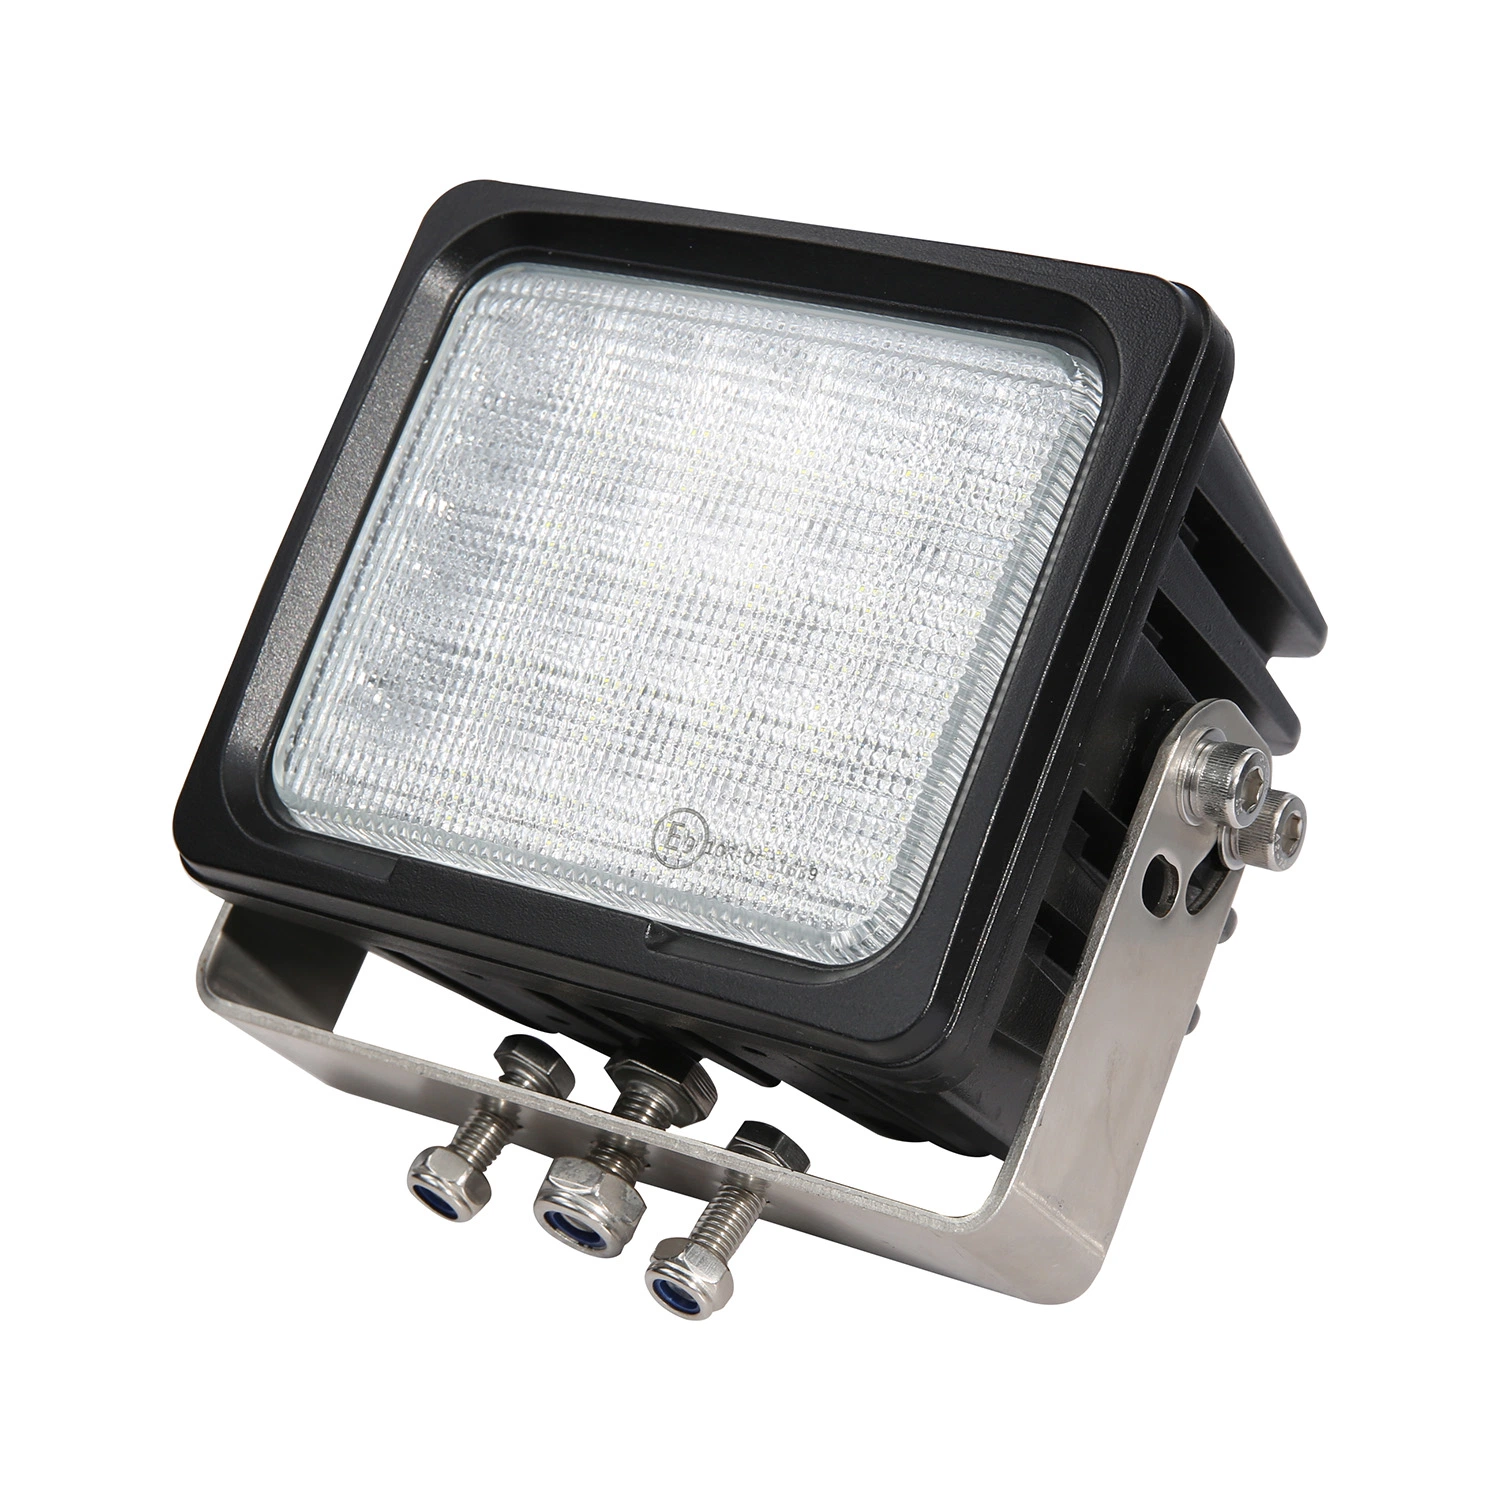 DC 10-30V Fast Lead Time China Auto Accessories for 4X4 off Road 6.5inch 100W Working Light